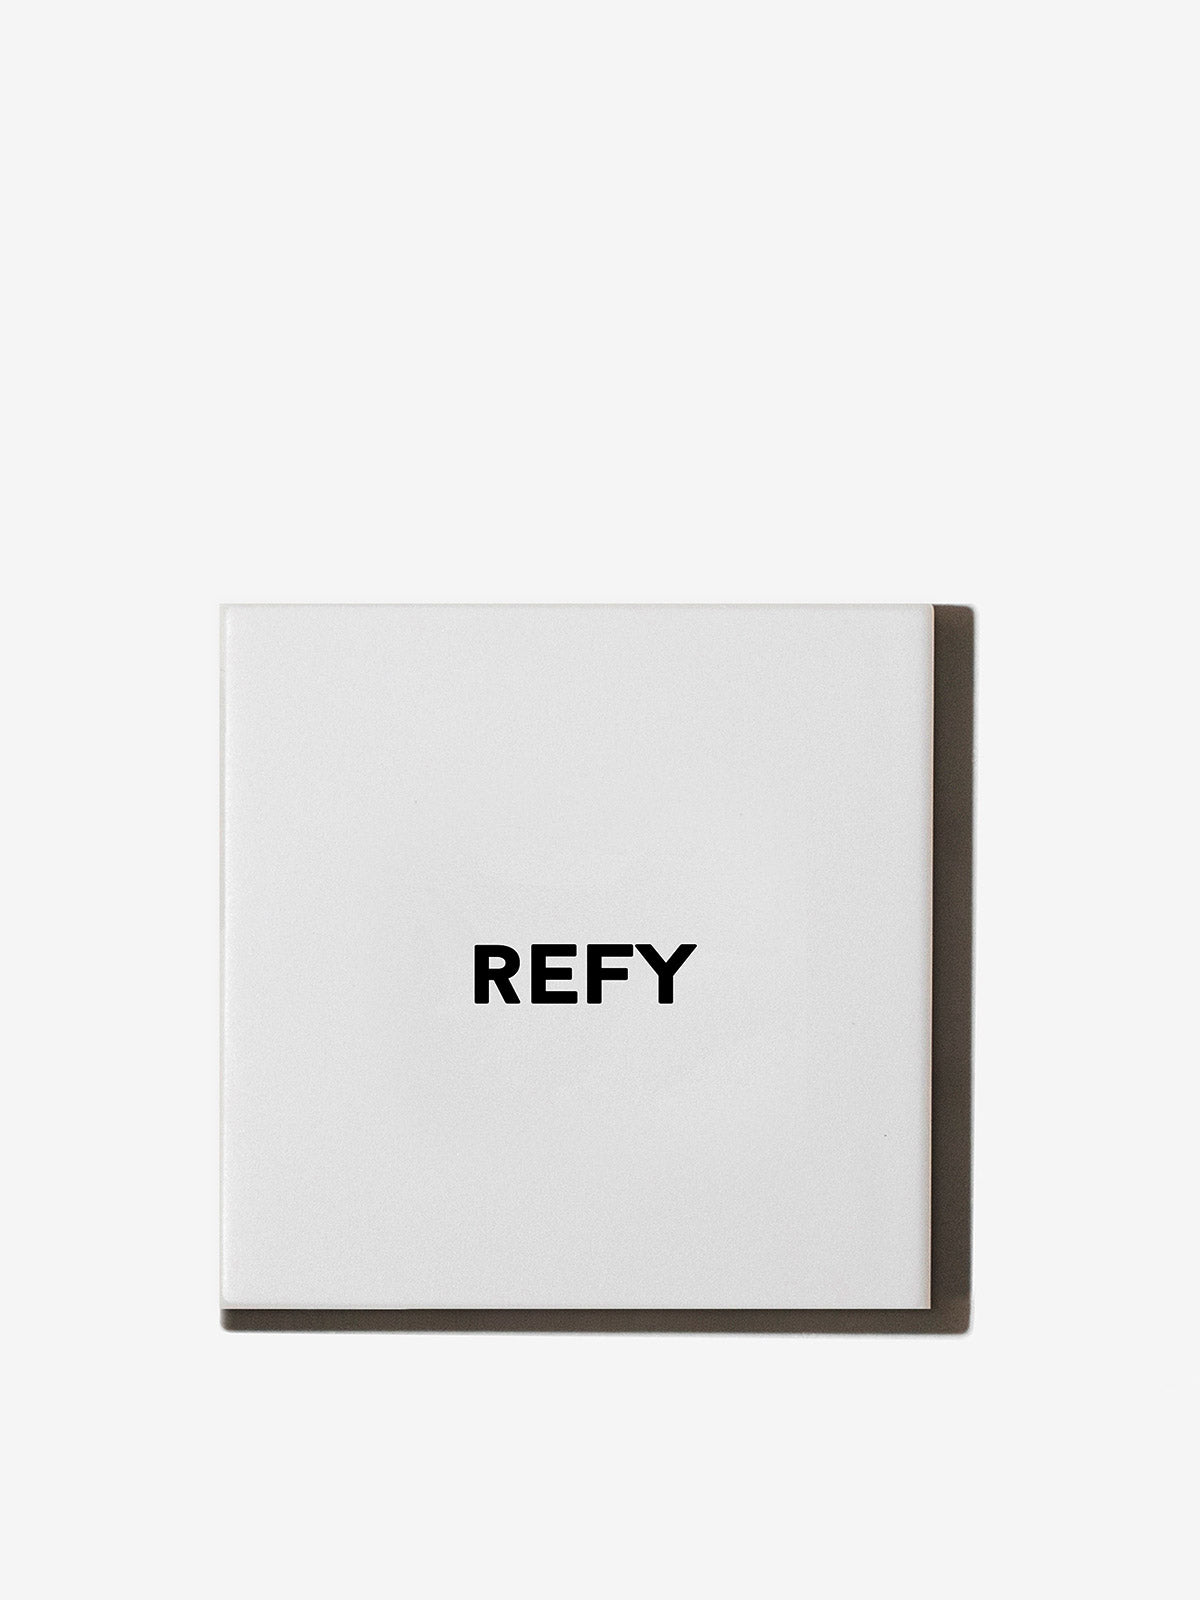 REFY SKIN FINISH IN SHADE 01 closed packaging